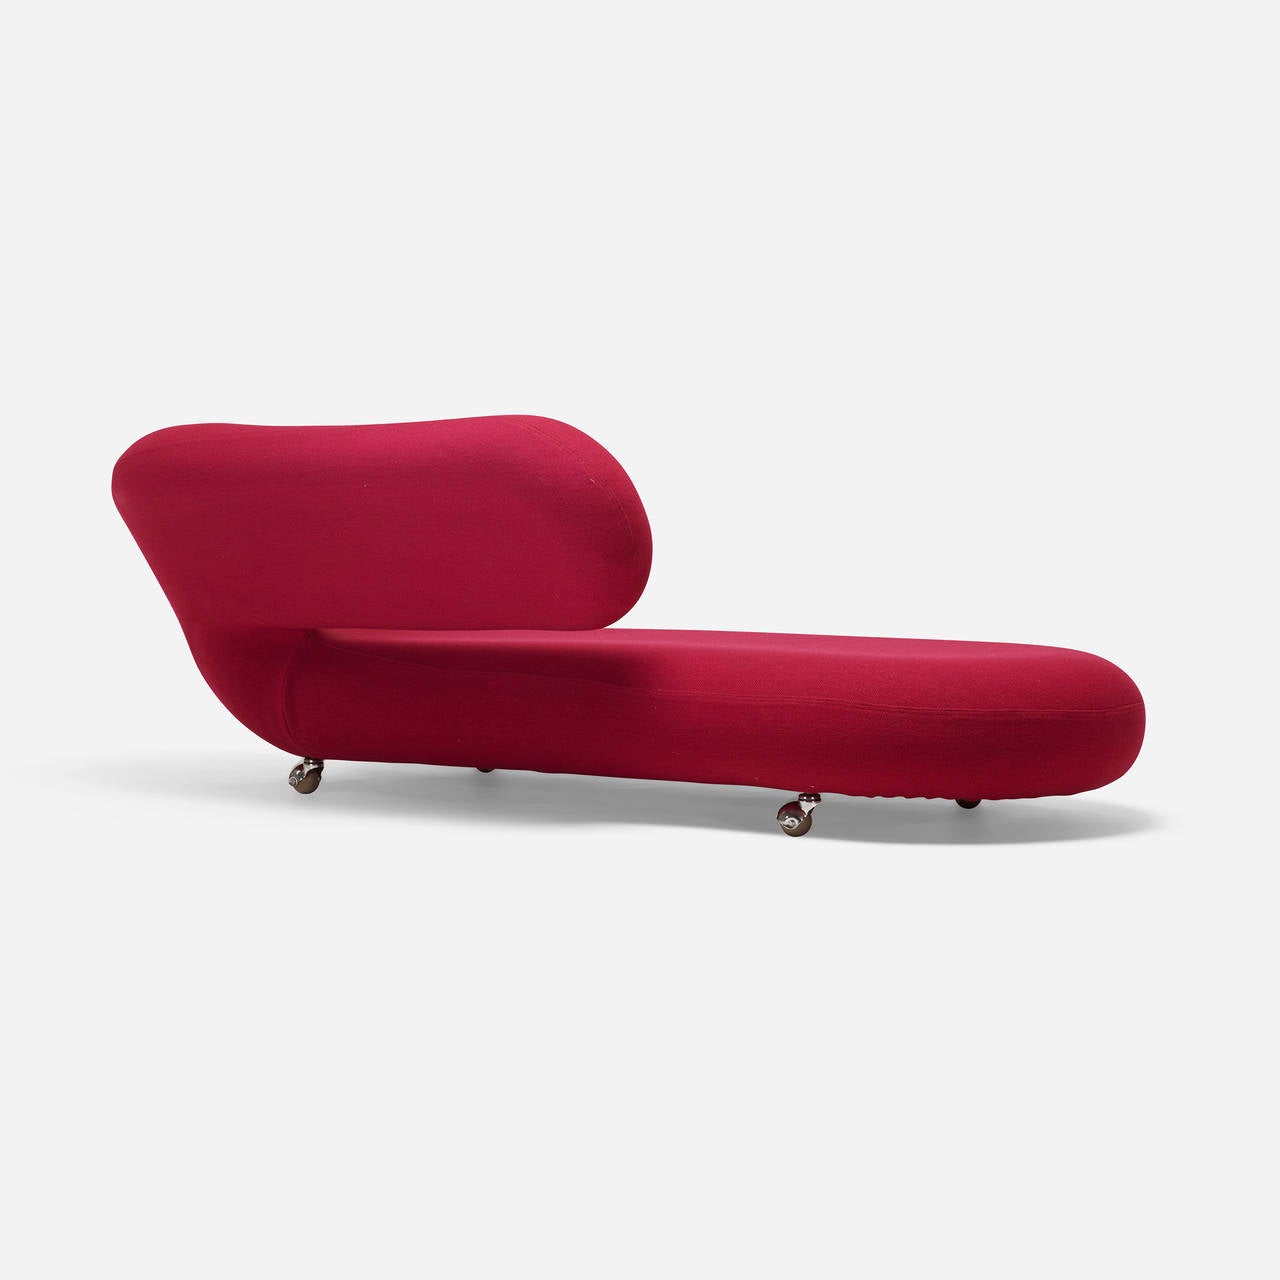 British Cleopatra Chaise Lounge by Geoffrey Harcourt for Artifort